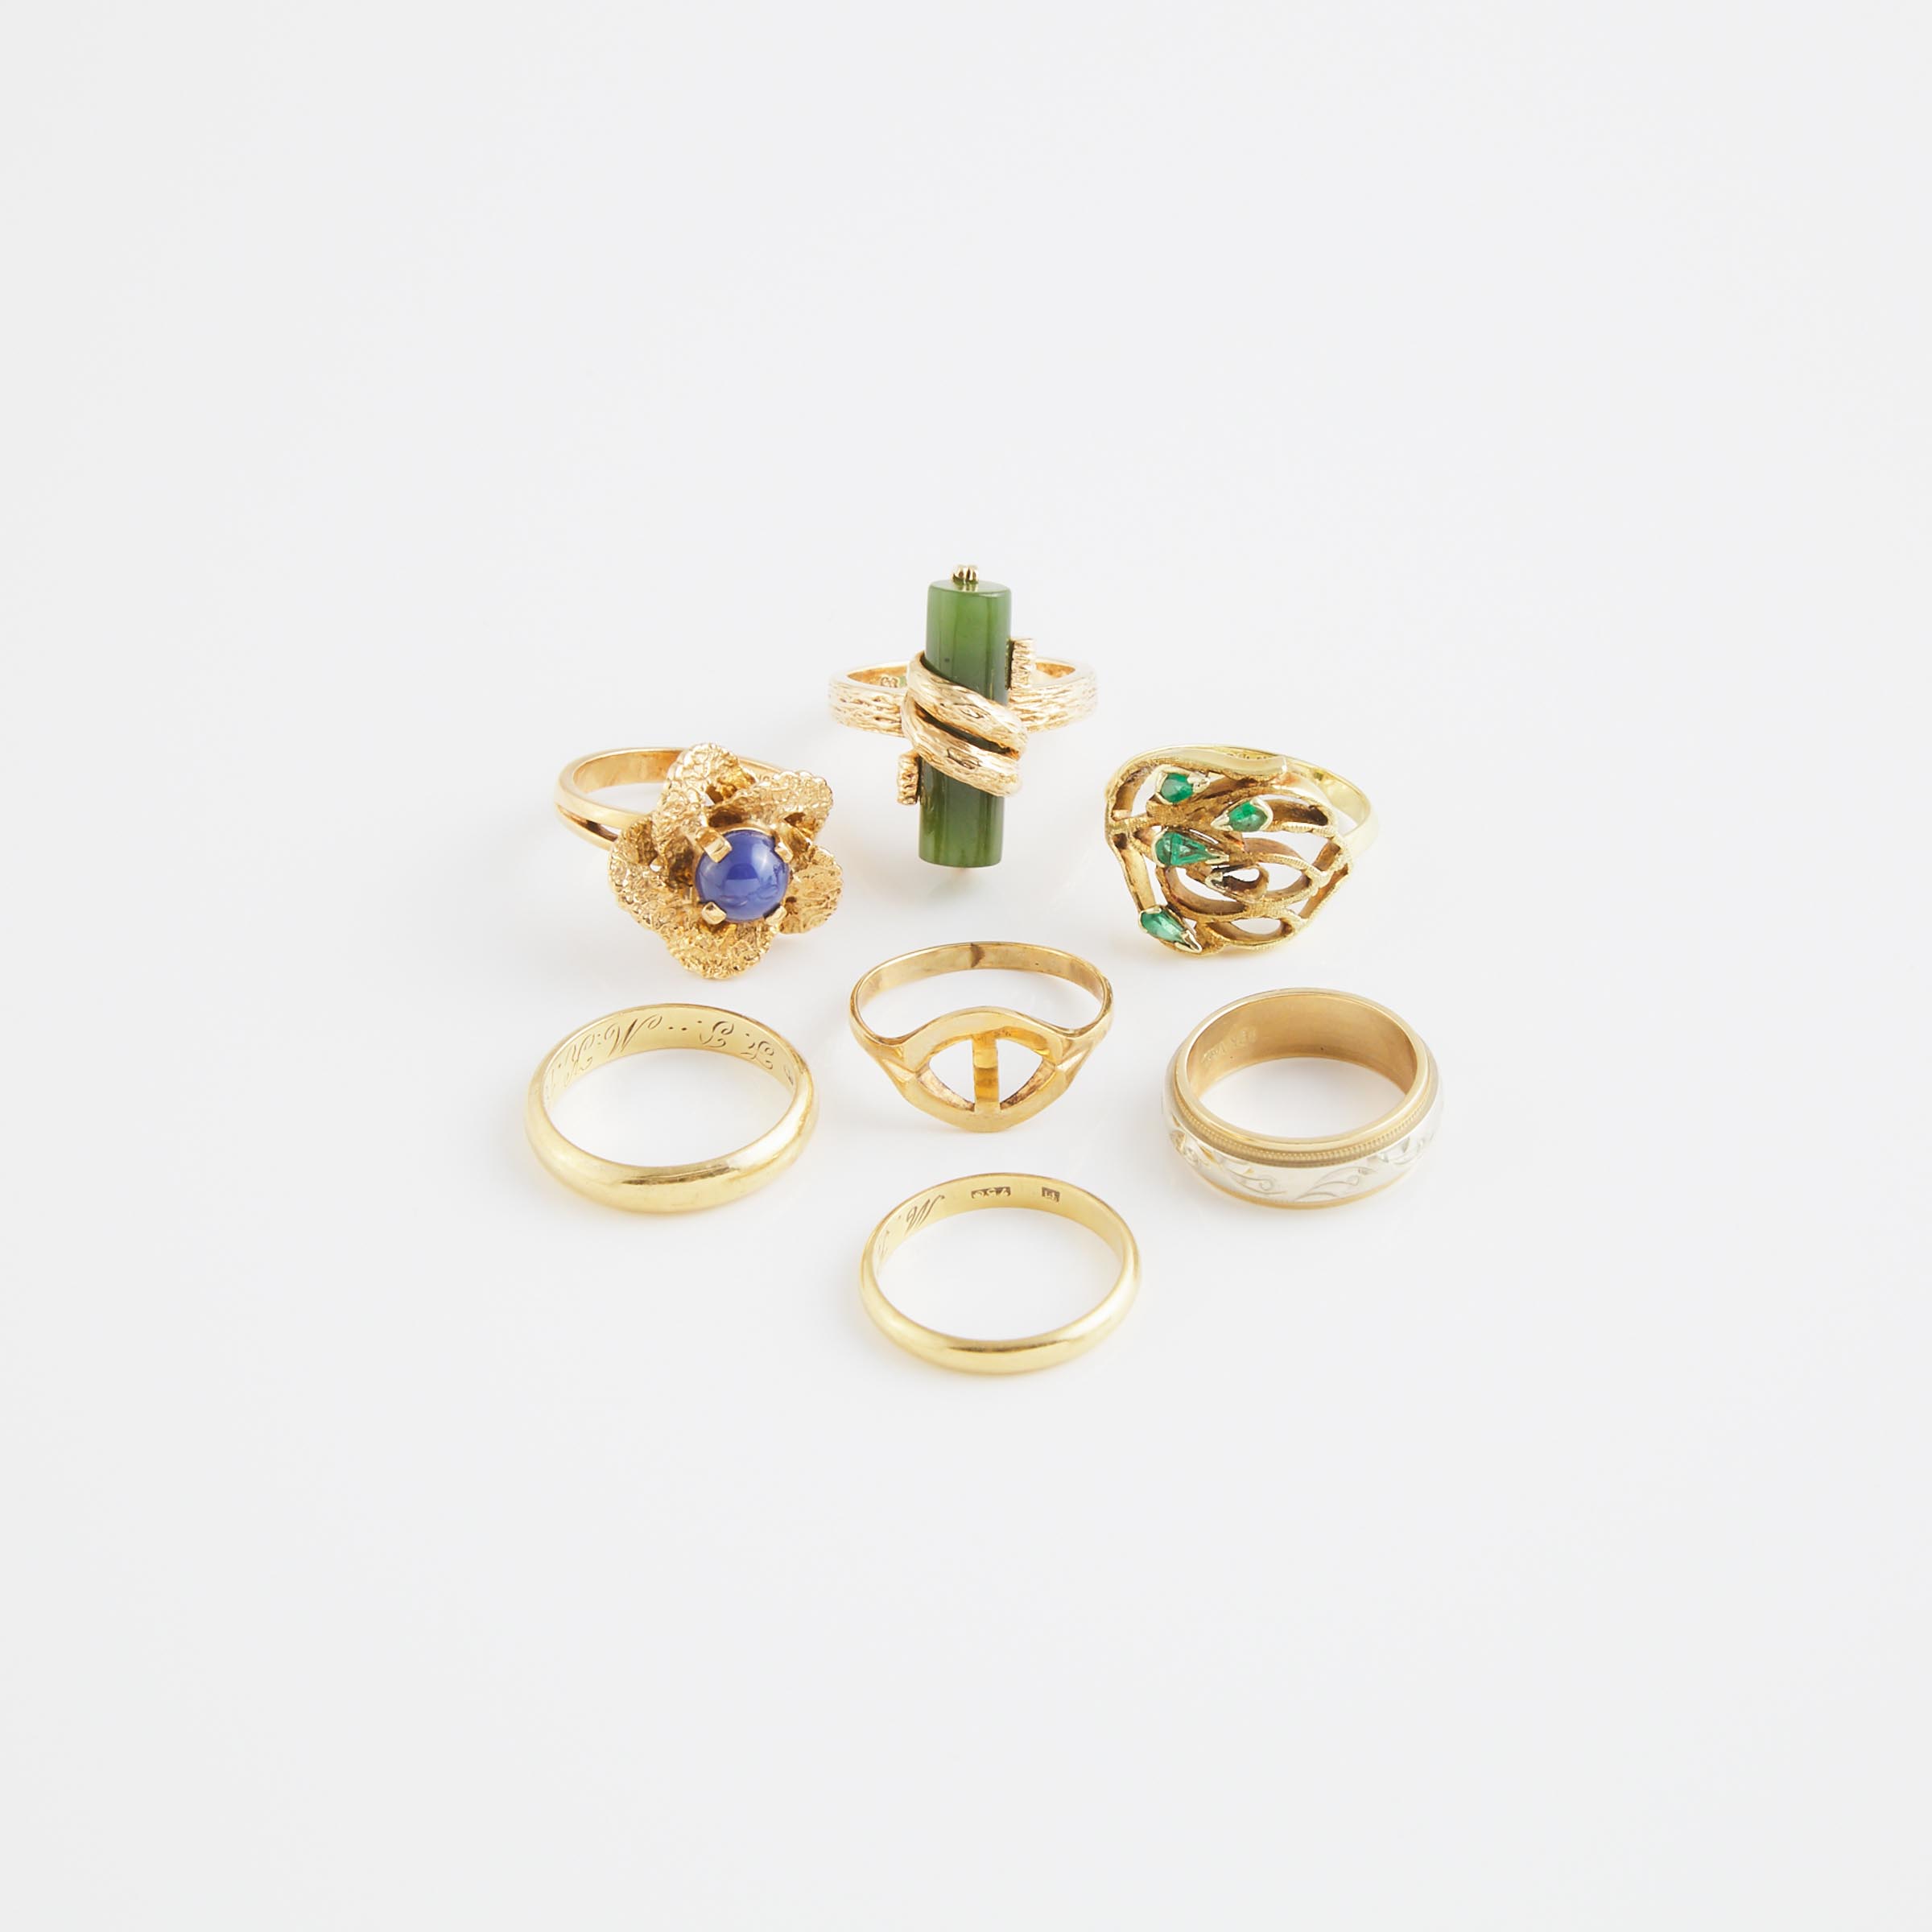 3 x 18k And 4 x 10k Yellow Gold Rings